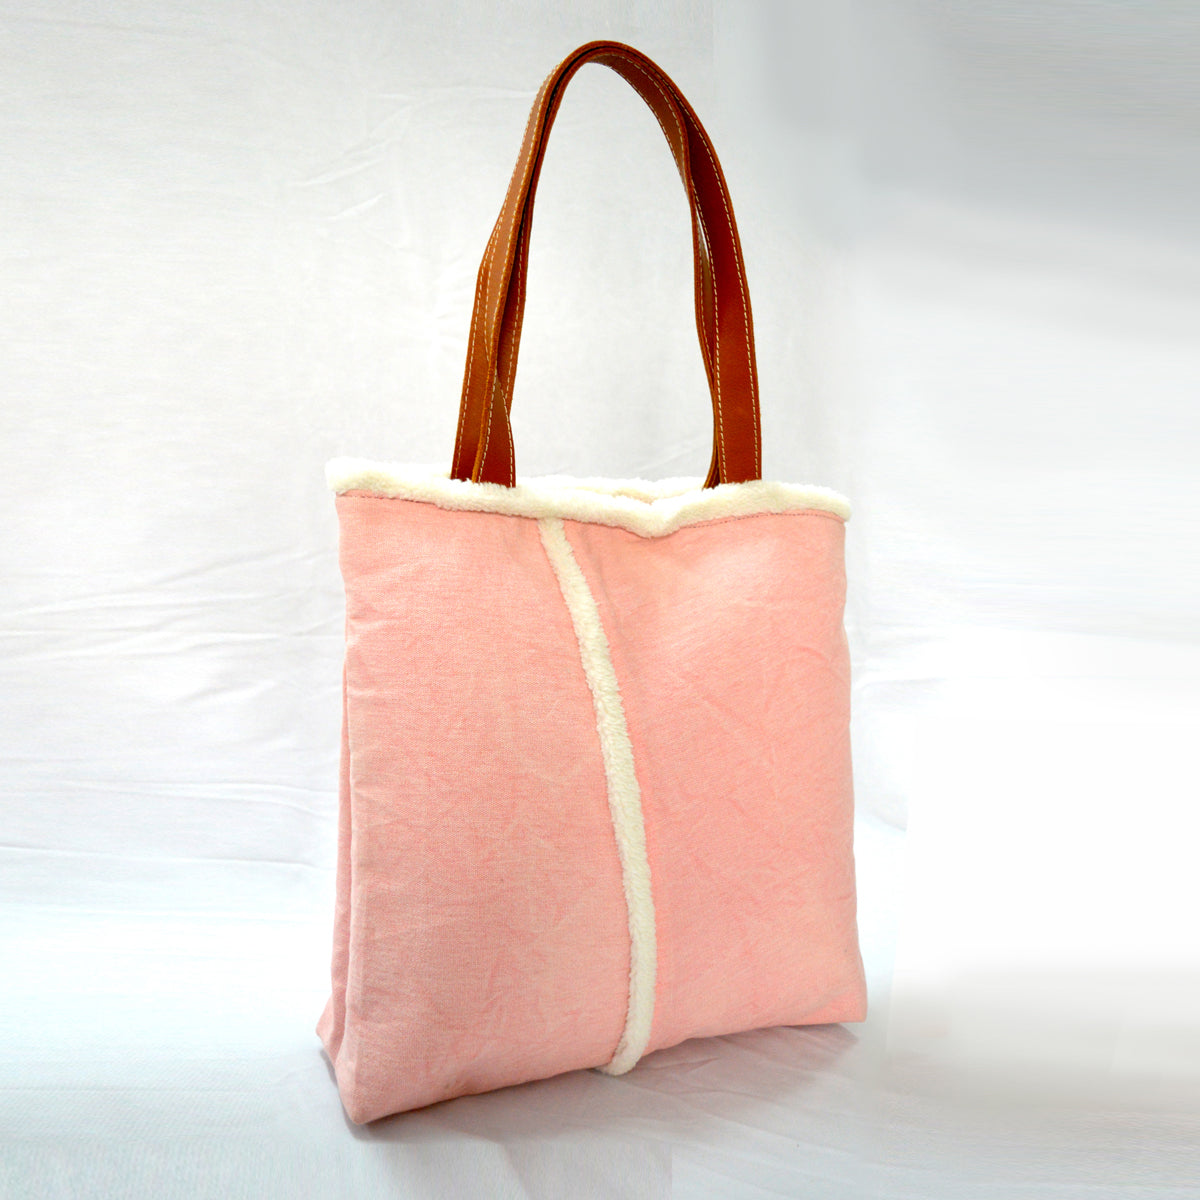 Tote bag - blush stonewashed canvas with leather handles